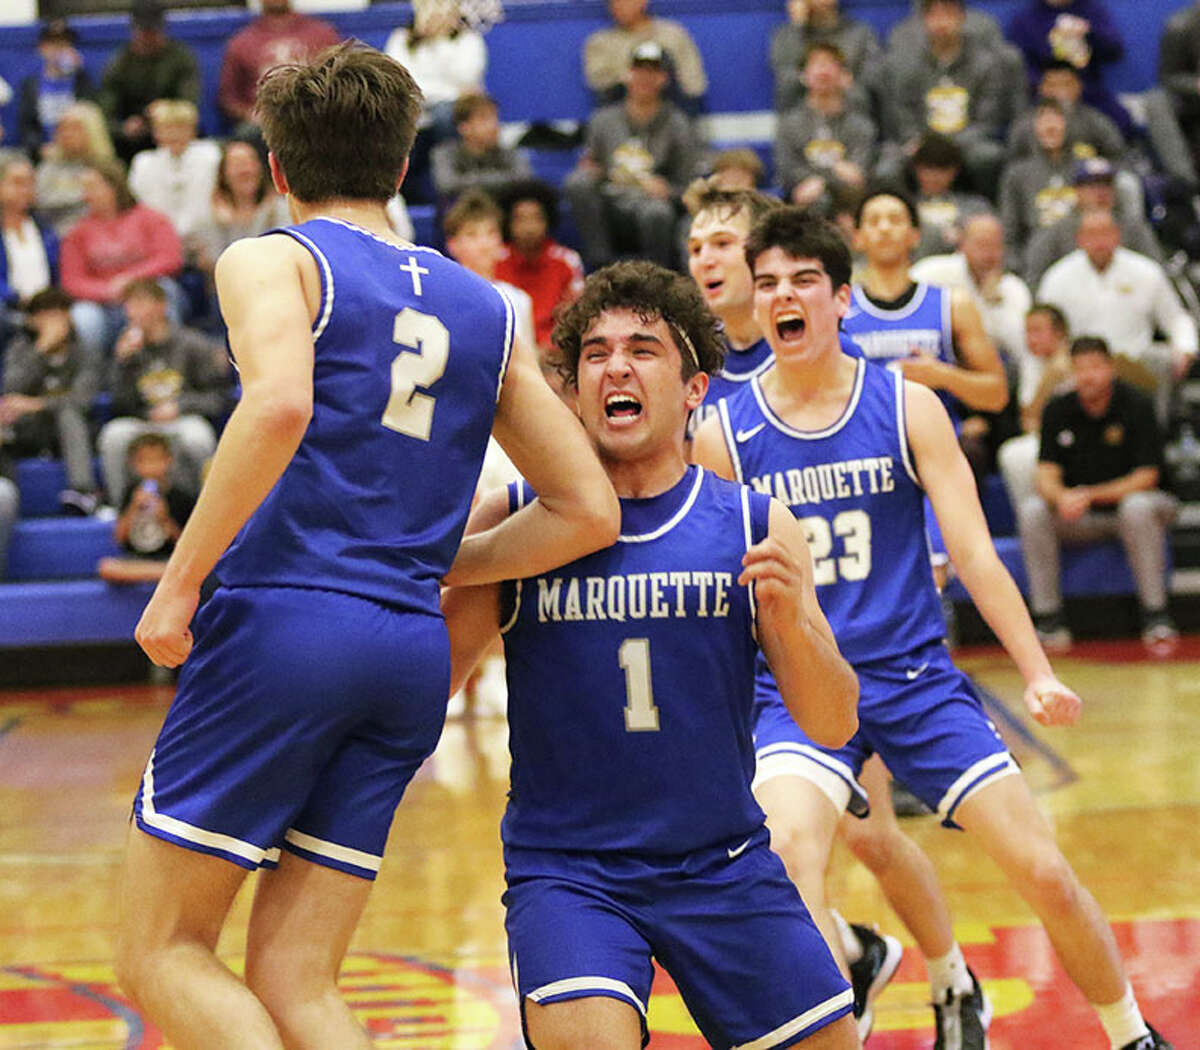 Marquette's Parker Macias (1) and Jack Spain rush in to congratulate Braden Kline after Kline's fourth 3-pointer in the third quarter led to a Jersey timeout Wednesday night at the Hoopsgiving Classic at Roxana.